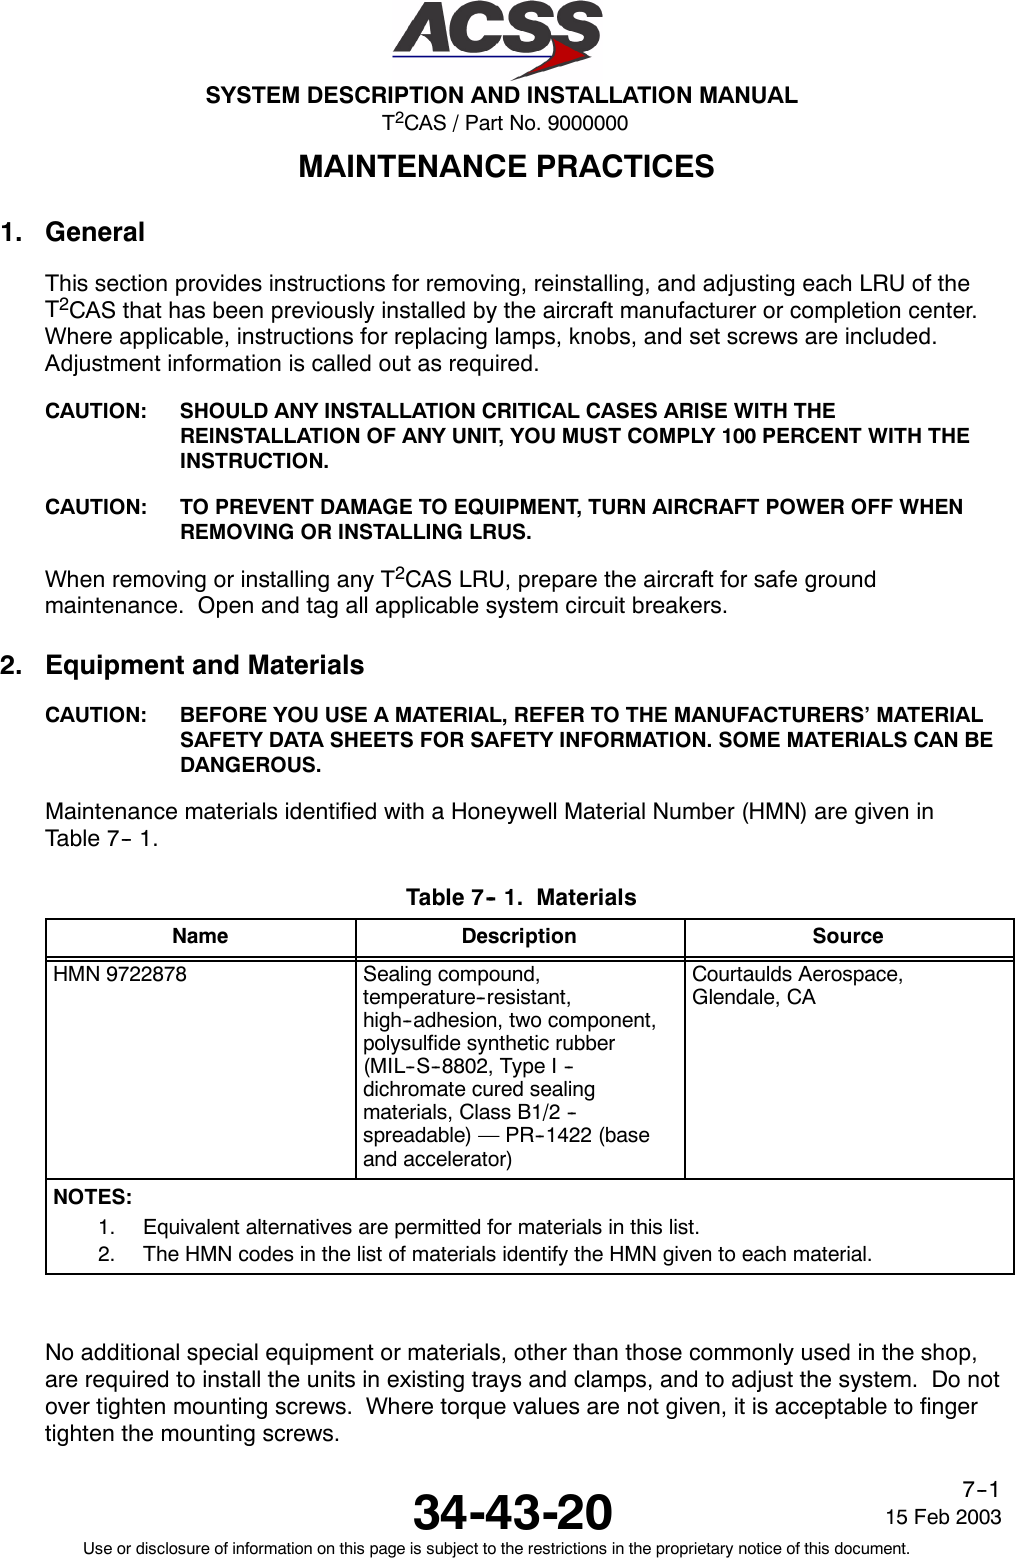 T2CAS / Part No. 9000000SYSTEM DESCRIPTION AND INSTALLATION MANUAL34-43-20 15 Feb 2003Use or disclosure of information on this page is subject to the restrictions in the proprietary notice of this document.7--1MAINTENANCE PRACTICES1. GeneralThis section provides instructions for removing, reinstalling, and adjusting each LRU of theT2CAS that has been previously installed by the aircraft manufacturer or completion center.Where applicable, instructions for replacing lamps, knobs, and set screws are included.Adjustment information is called out as required.CAUTION: SHOULD ANY INSTALLATION CRITICAL CASES ARISE WITH THEREINSTALLATION OF ANY UNIT, YOU MUST COMPLY 100 PERCENT WITH THEINSTRUCTION.CAUTION: TO PREVENT DAMAGE TO EQUIPMENT, TURN AIRCRAFT POWER OFF WHENREMOVING OR INSTALLING LRUS.When removing or installing any T2CAS LRU, prepare the aircraft for safe groundmaintenance. Open and tag all applicable system circuit breakers.2. Equipment and MaterialsCAUTION: BEFORE YOU USE A MATERIAL, REFER TO THE MANUFACTURERS’ MATERIALSAFETY DATA SHEETS FOR SAFETY INFORMATION. SOME MATERIALS CAN BEDANGEROUS.Maintenance materials identified with a Honeywell Material Number (HMN) are given inTable 7-- 1.Table 7-- 1. MaterialsName Description SourceHMN 9722878 Sealing compound,temperature--resistant,high--adhesion, two component,polysulfide synthetic rubber(MIL--S--8802, Type I --dichromate cured sealingmaterials, Class B1/2 --spreadable) — PR--1422 (baseand accelerator)Courtaulds Aerospace,Glendale, CANOTES:1. Equivalent alternatives are permitted for materials in this list.2. The HMN codes in the list of materials identify the HMN given to each material.No additional special equipment or materials, other than those commonly used in the shop,are required to install the units in existing trays and clamps, and to adjust the system. Do notover tighten mounting screws. Where torque values are not given, it is acceptable to fingertighten the mounting screws.